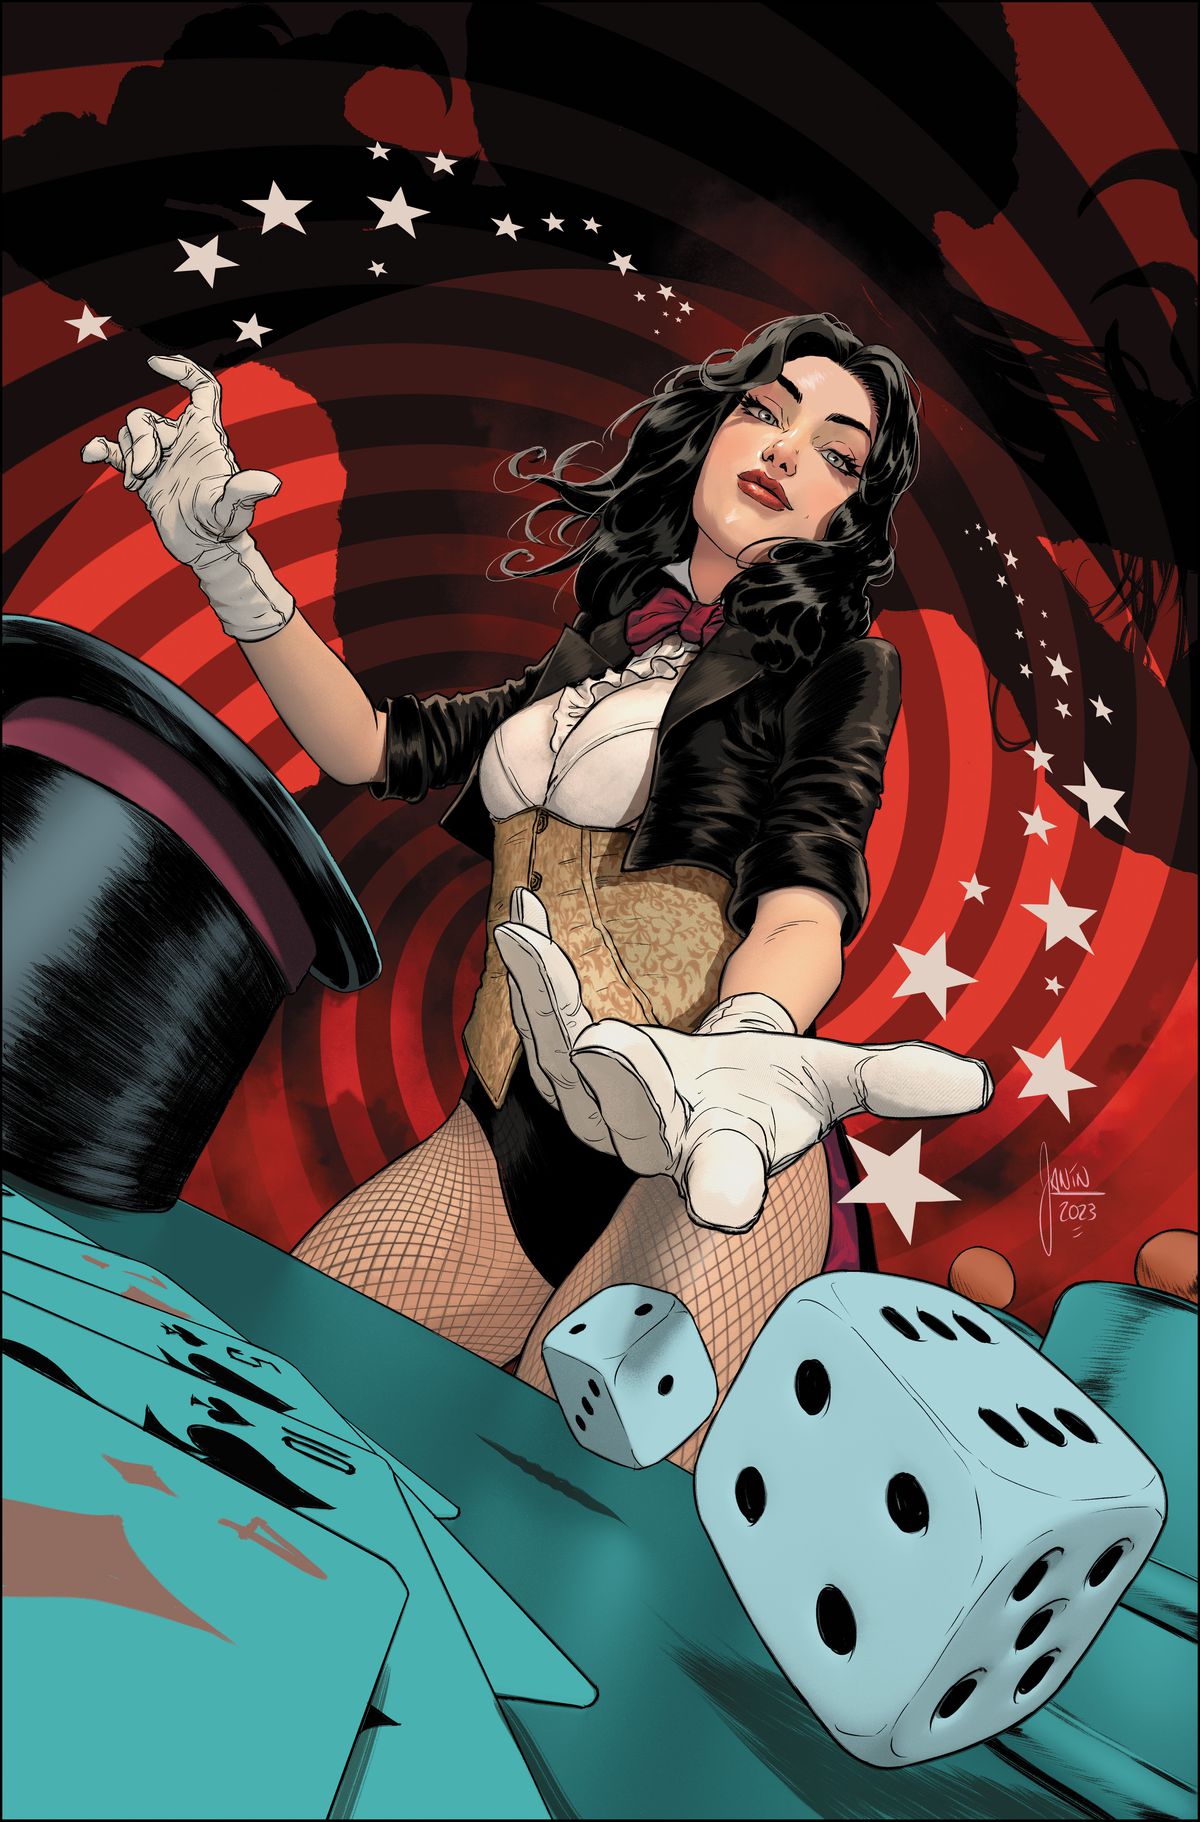 On a background of spirals and stars, Zatanna rolls the dice on a table covered in playing cards. 